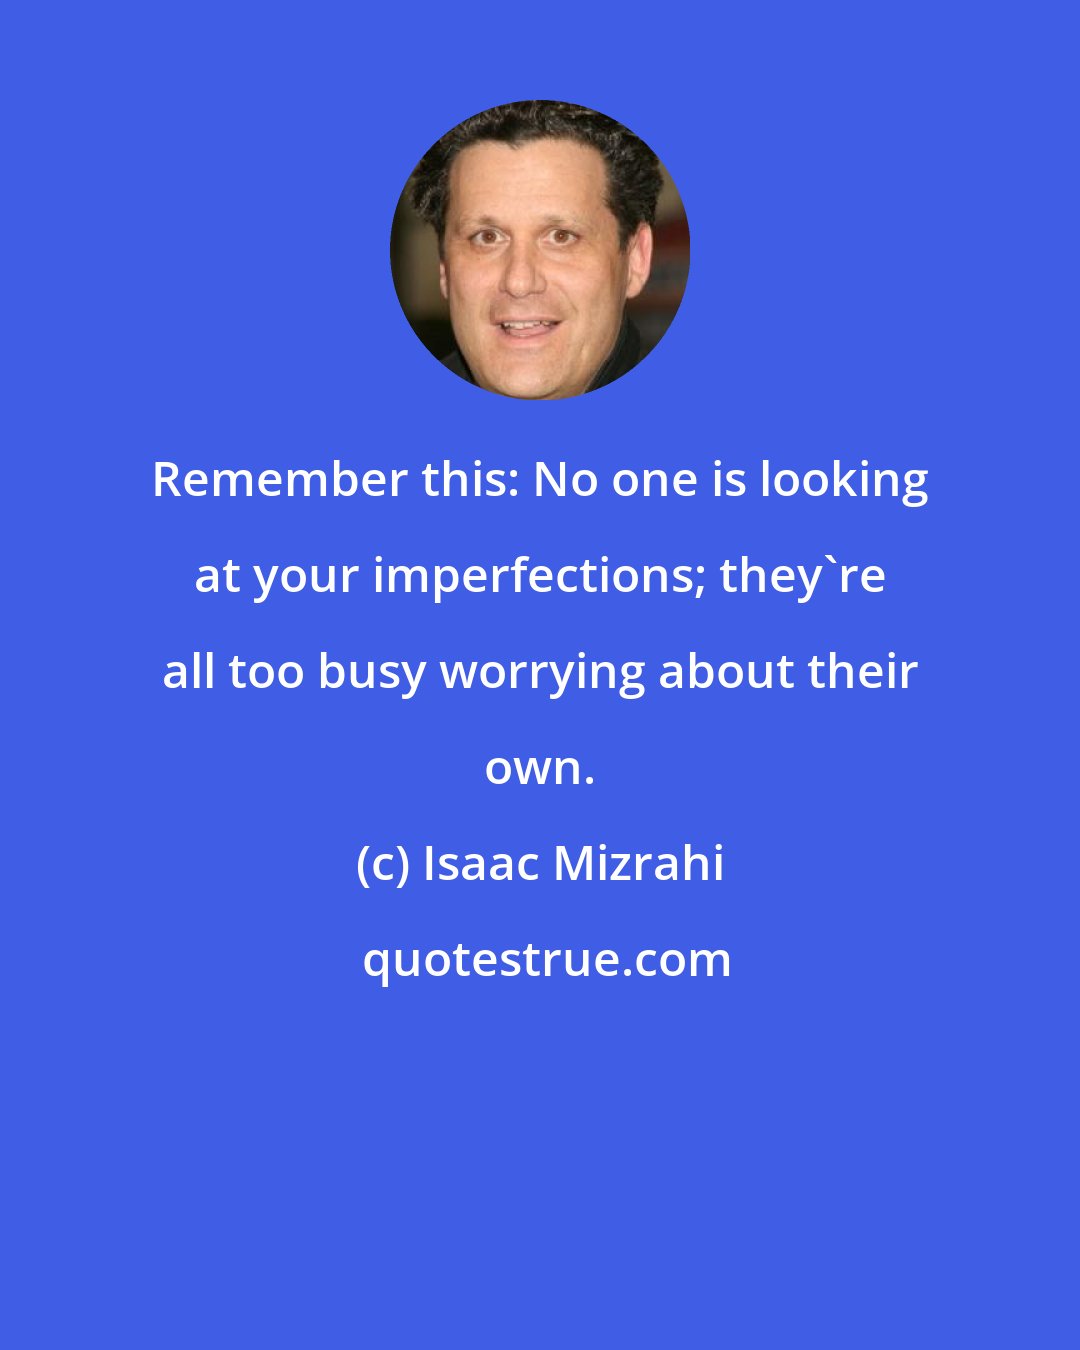 Isaac Mizrahi: Remember this: No one is looking at your imperfections; they're all too busy worrying about their own.